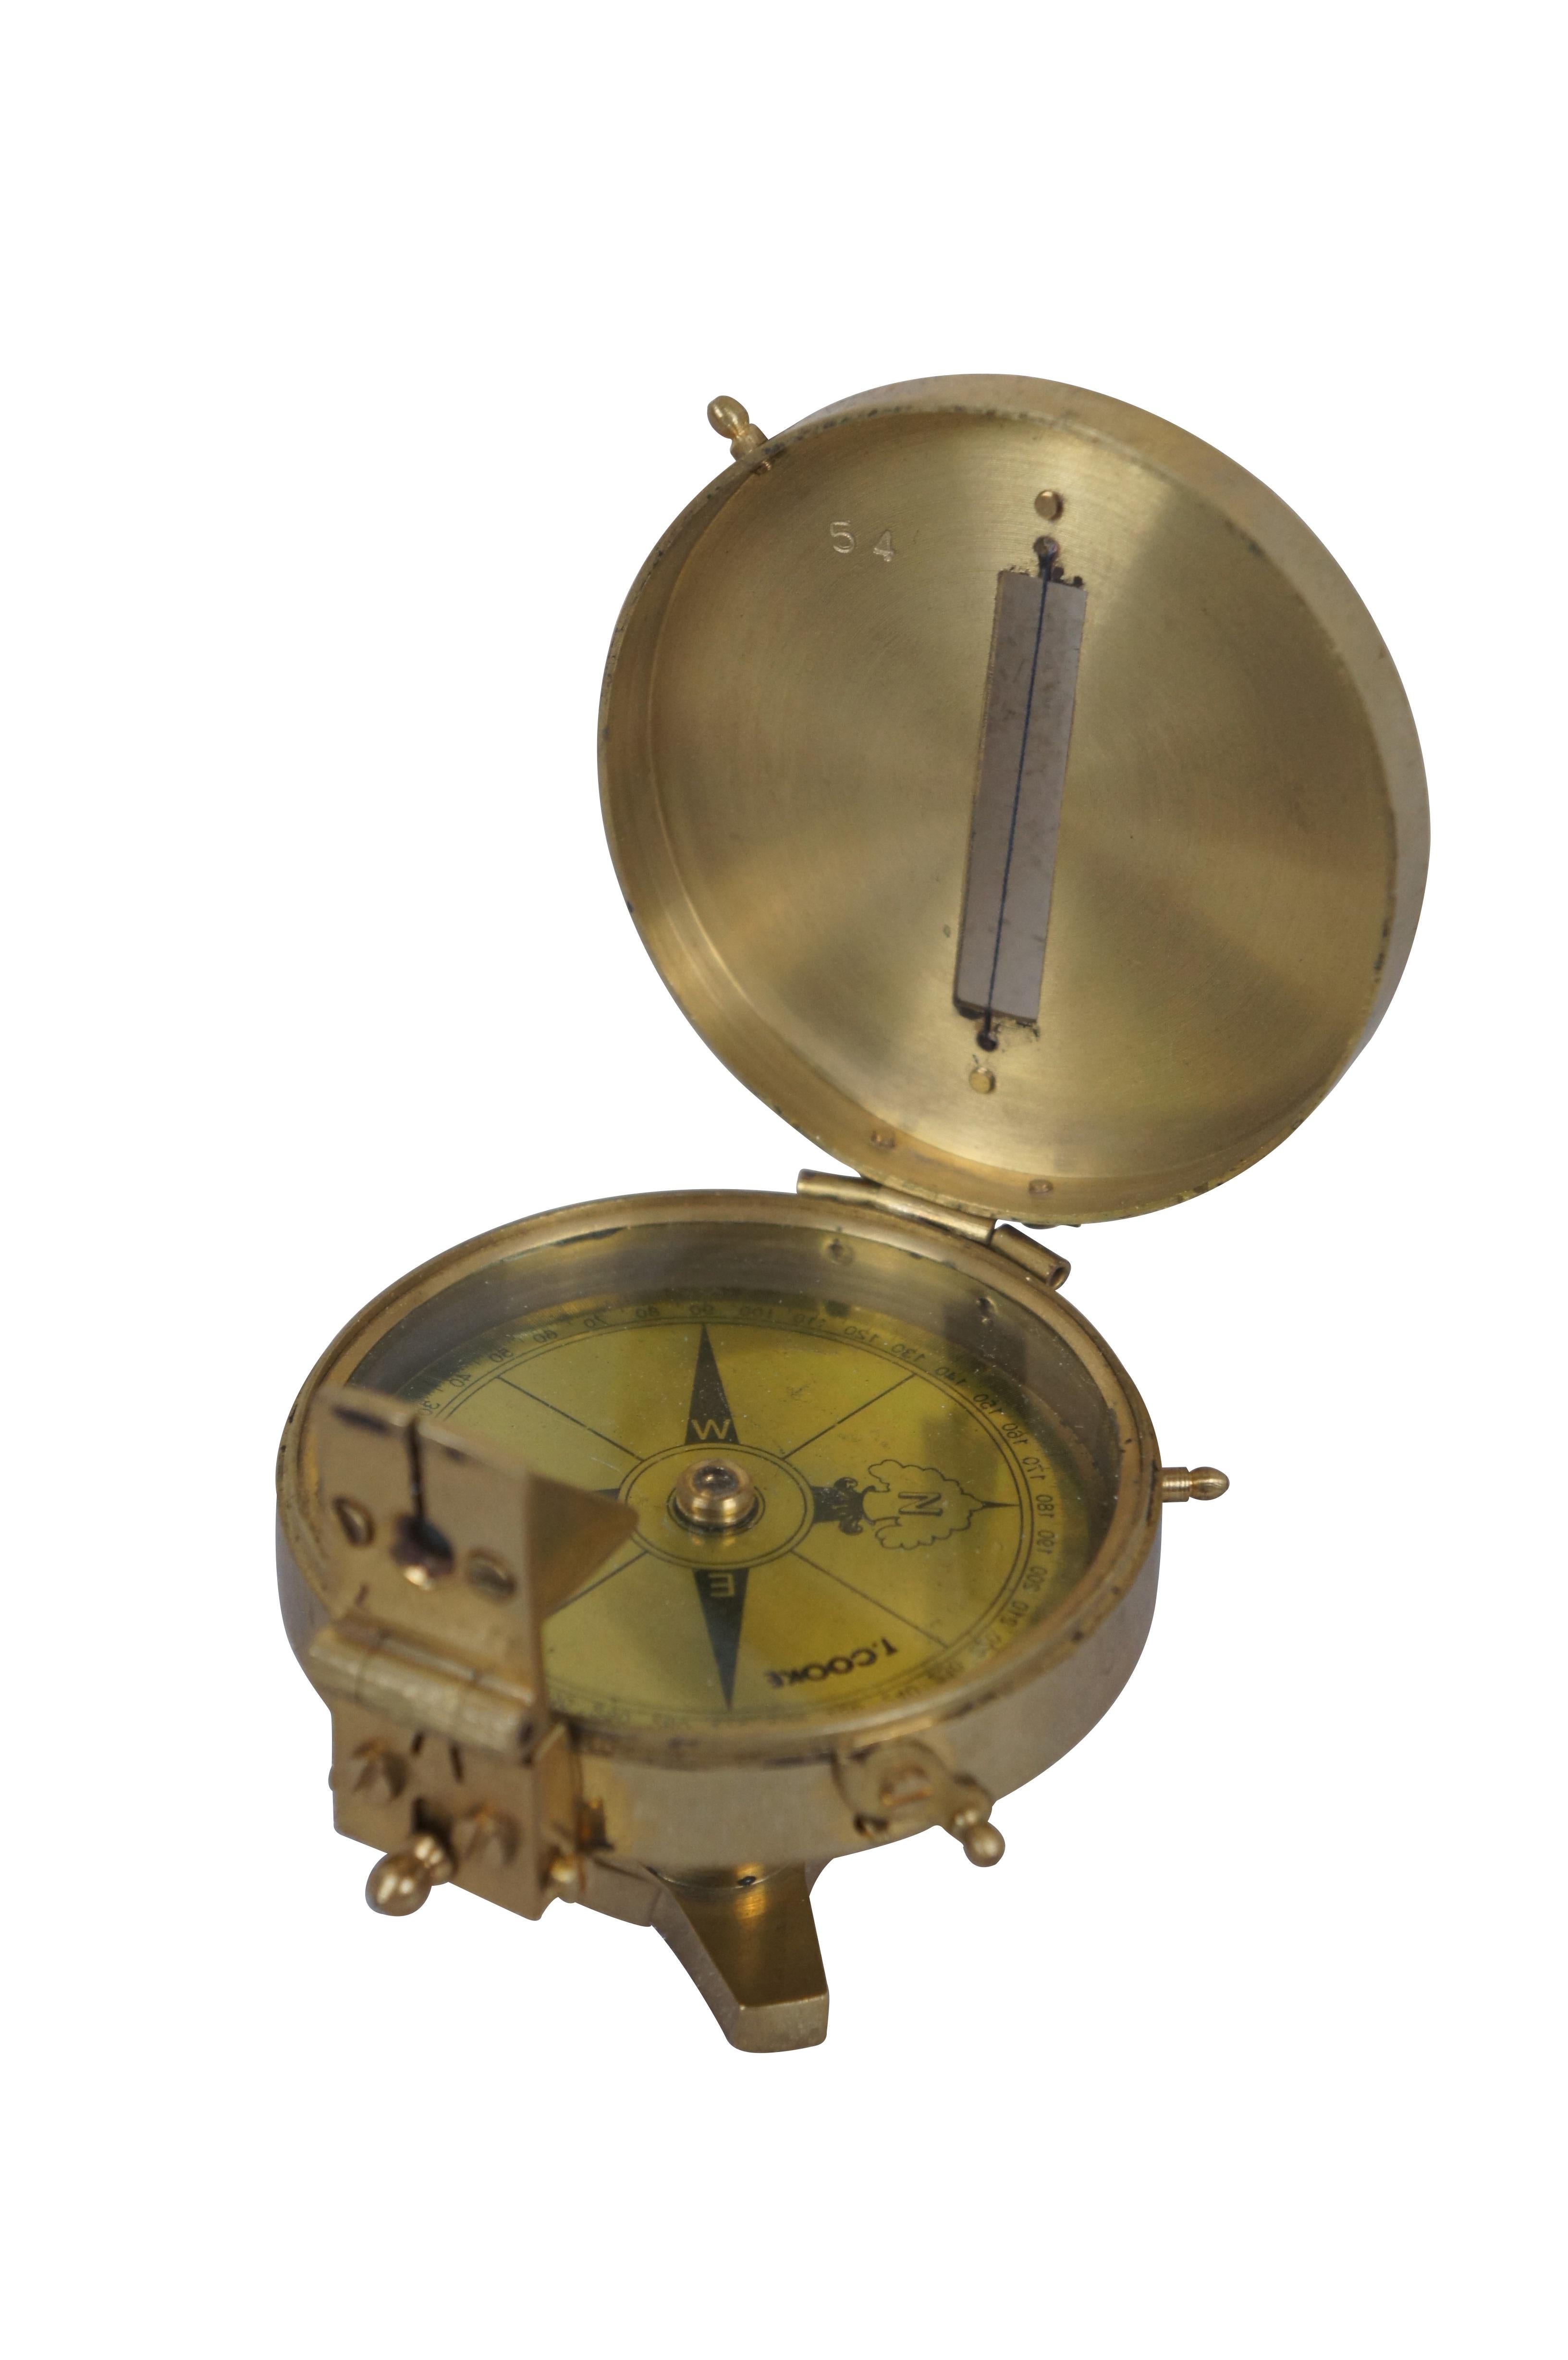 t cooke london compass